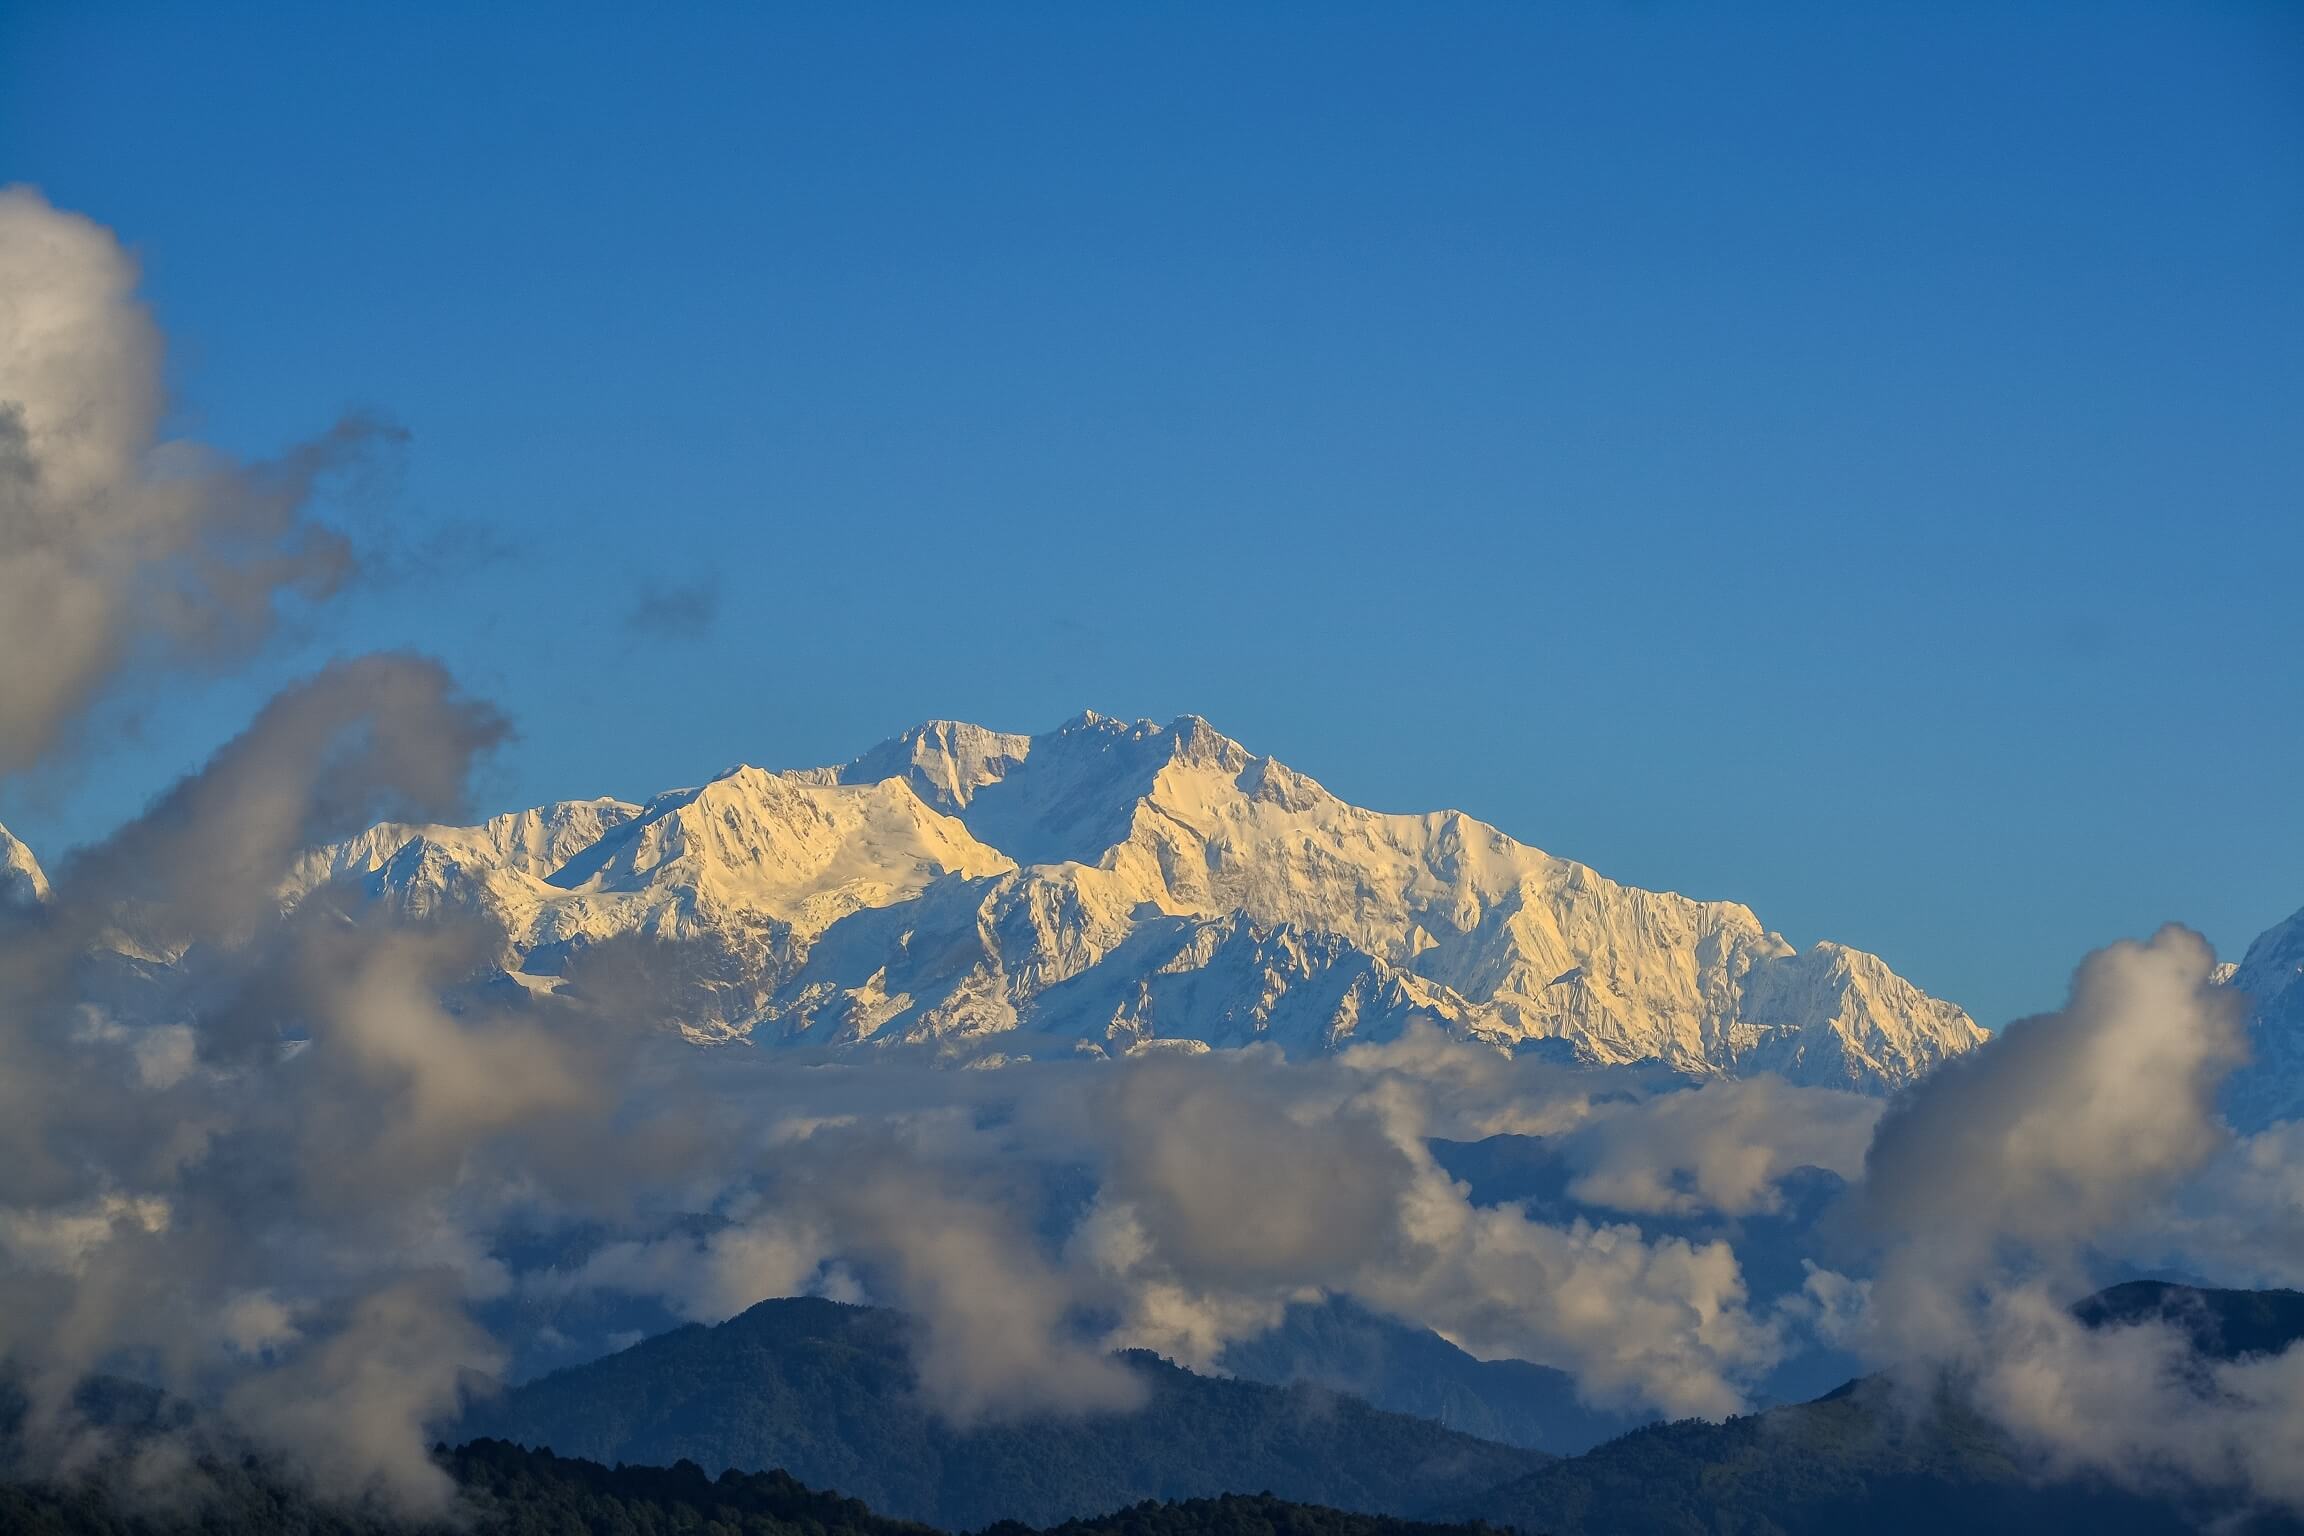 A mountain swathed in snow against a bright blue cloudless sky, with light cloud cover in the foreground.